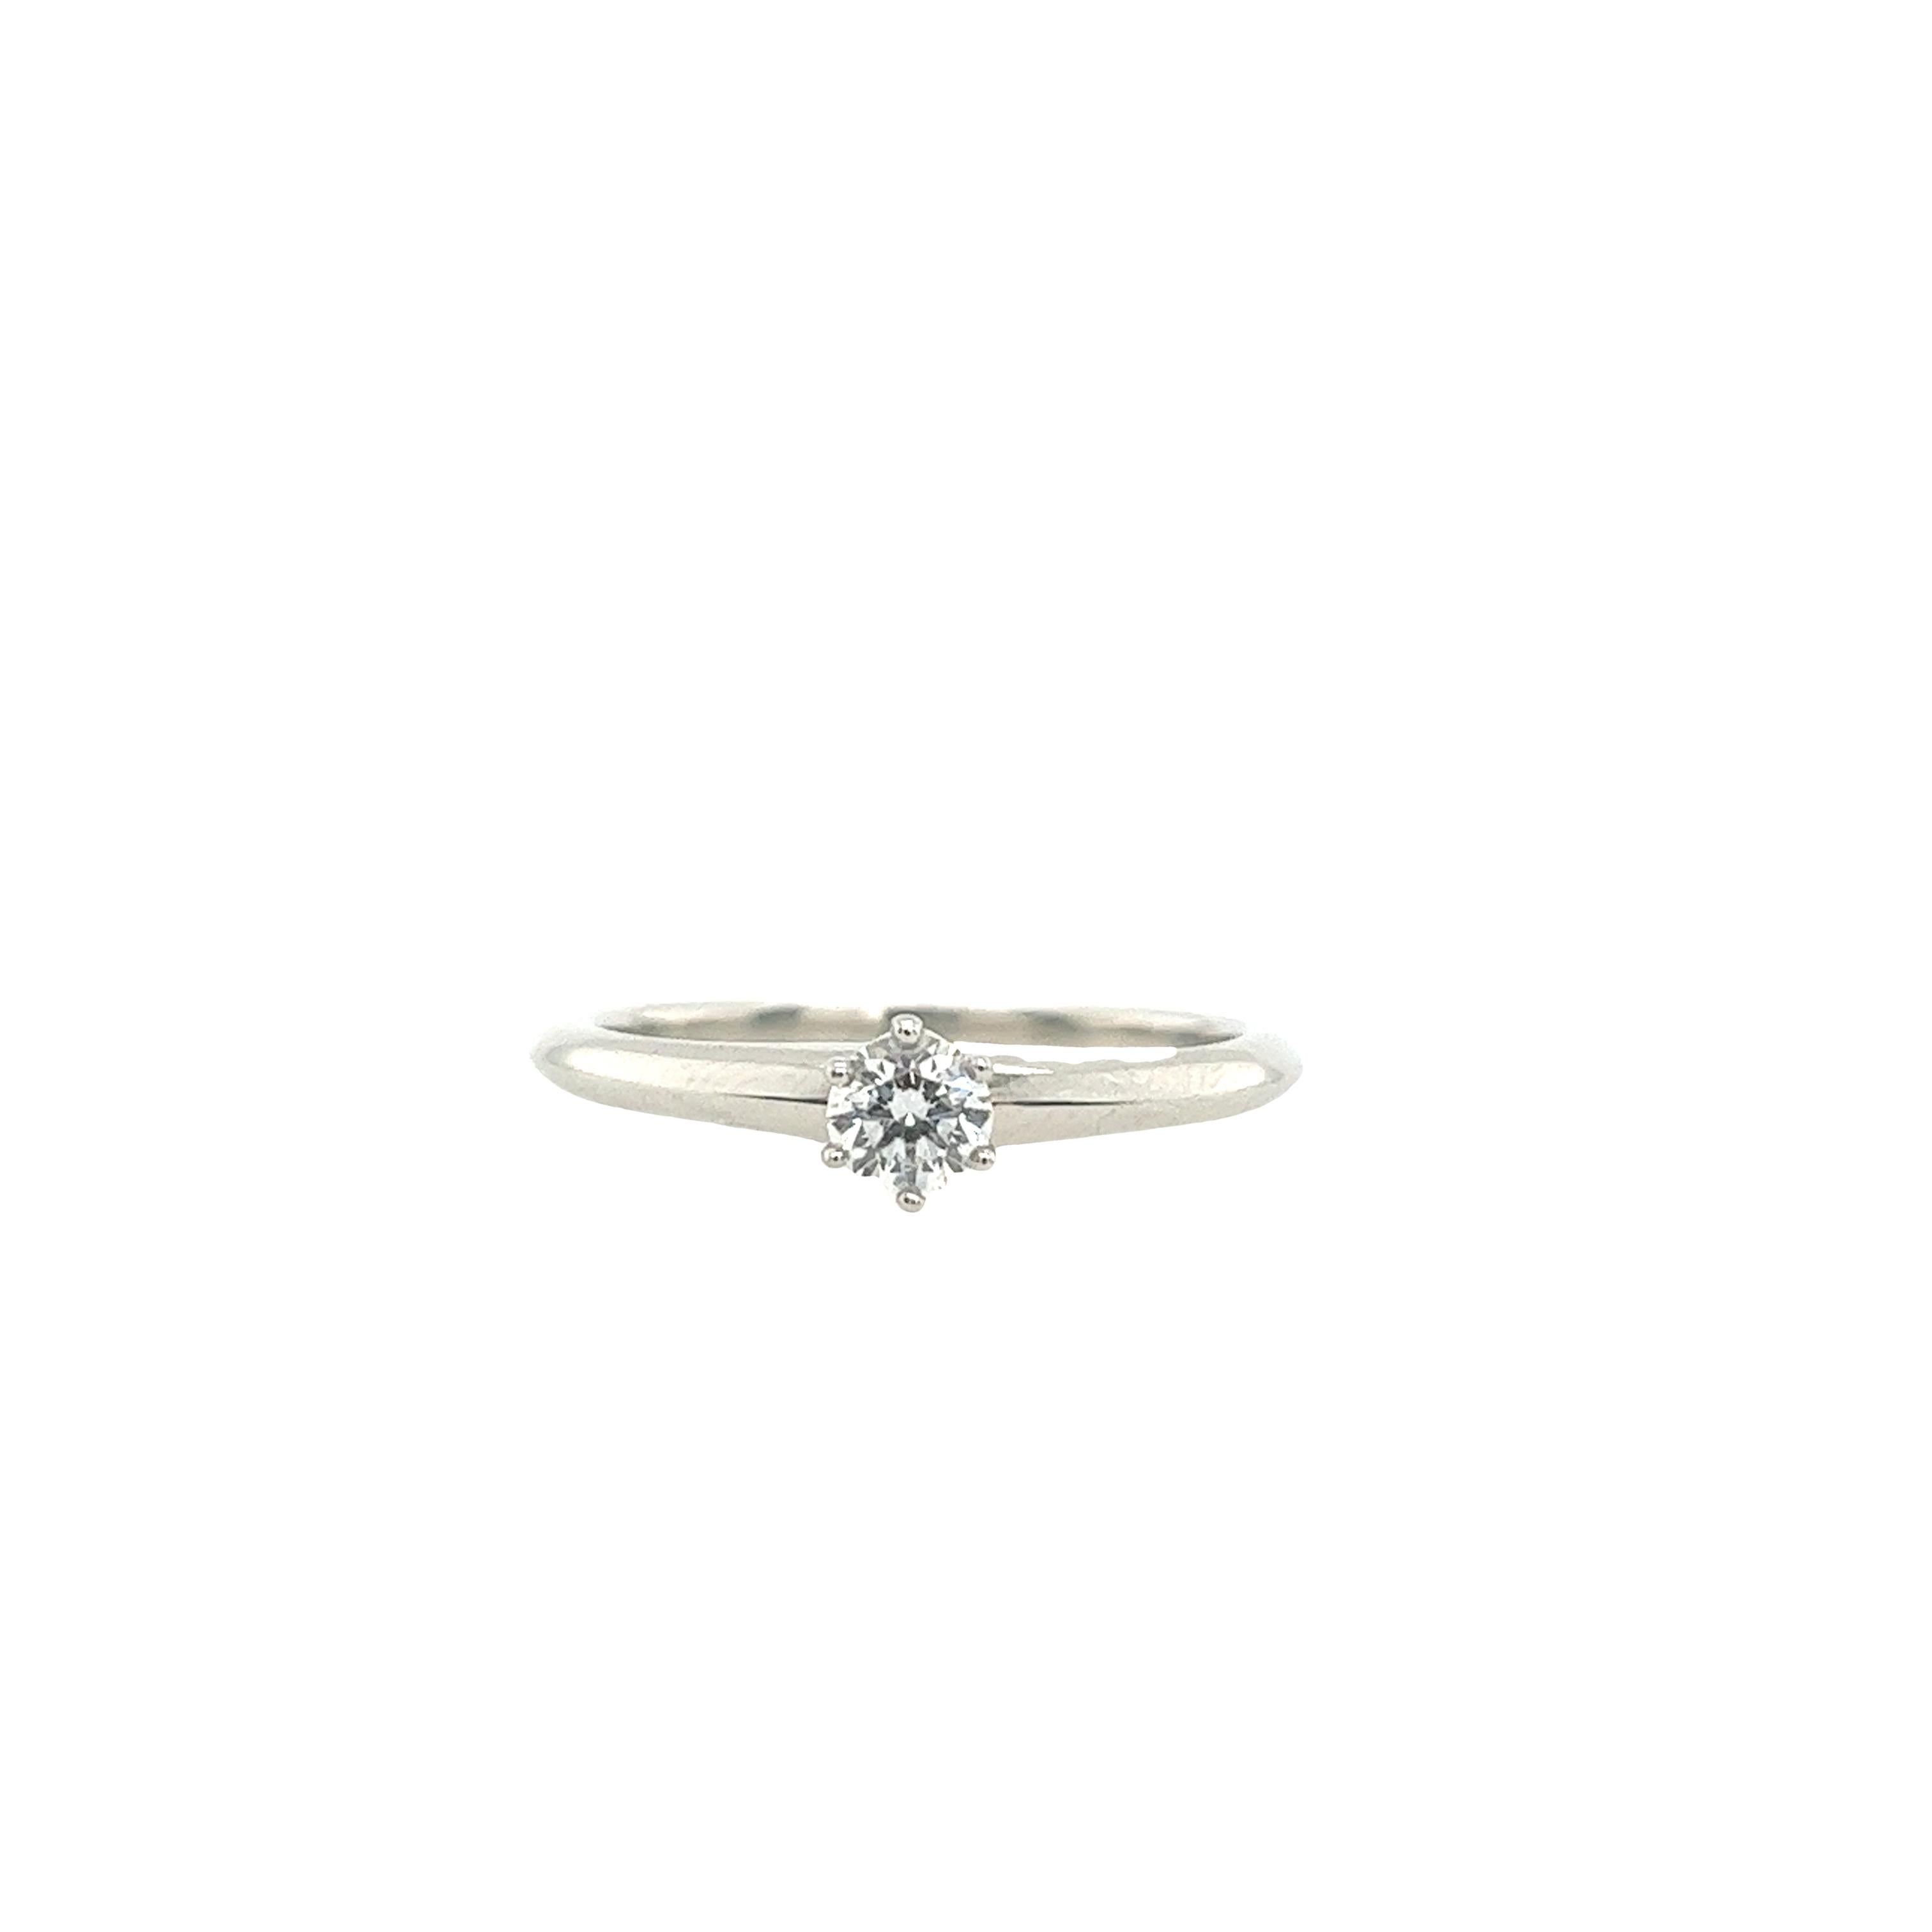 Capturing timeless beauty, the Tiffany & Co. Platinum Solitaire Diamond Engagement Ring features a stunning 0.24ct round brilliant-cut diamond. Graded E color and IF clarity, it radiates brilliance and purity, symbolizing everlasting love and